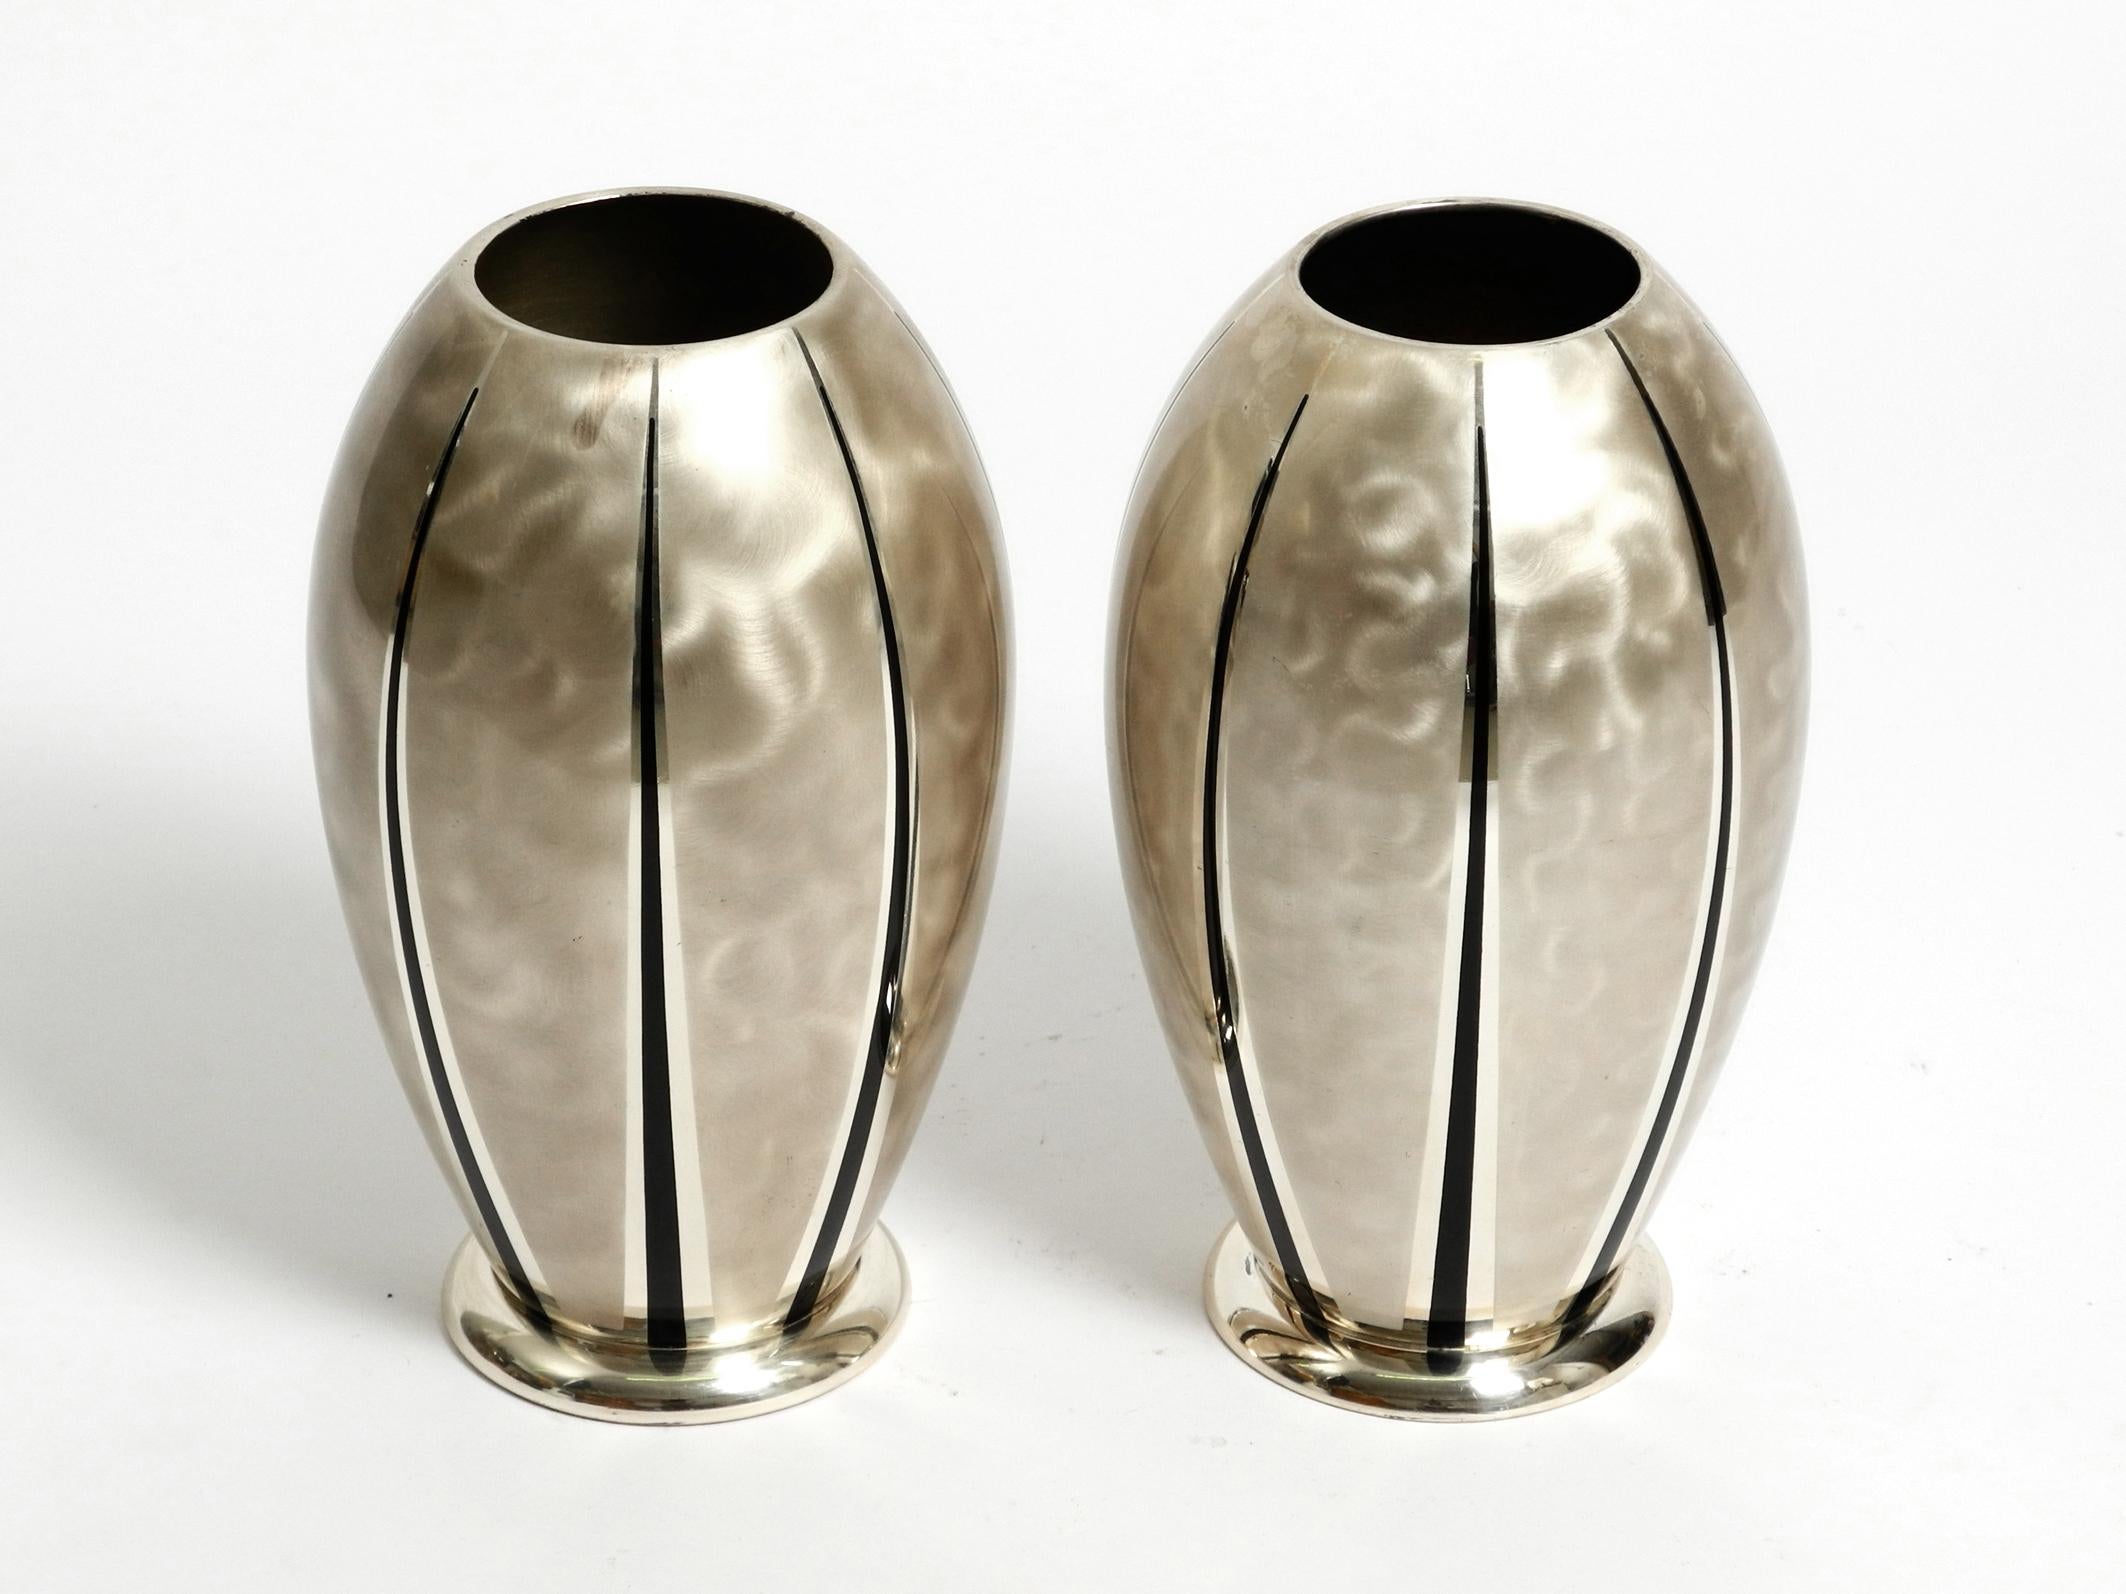 Pair of Mid Century Modern WMF Ikora table vases made of silver-plated brass 7